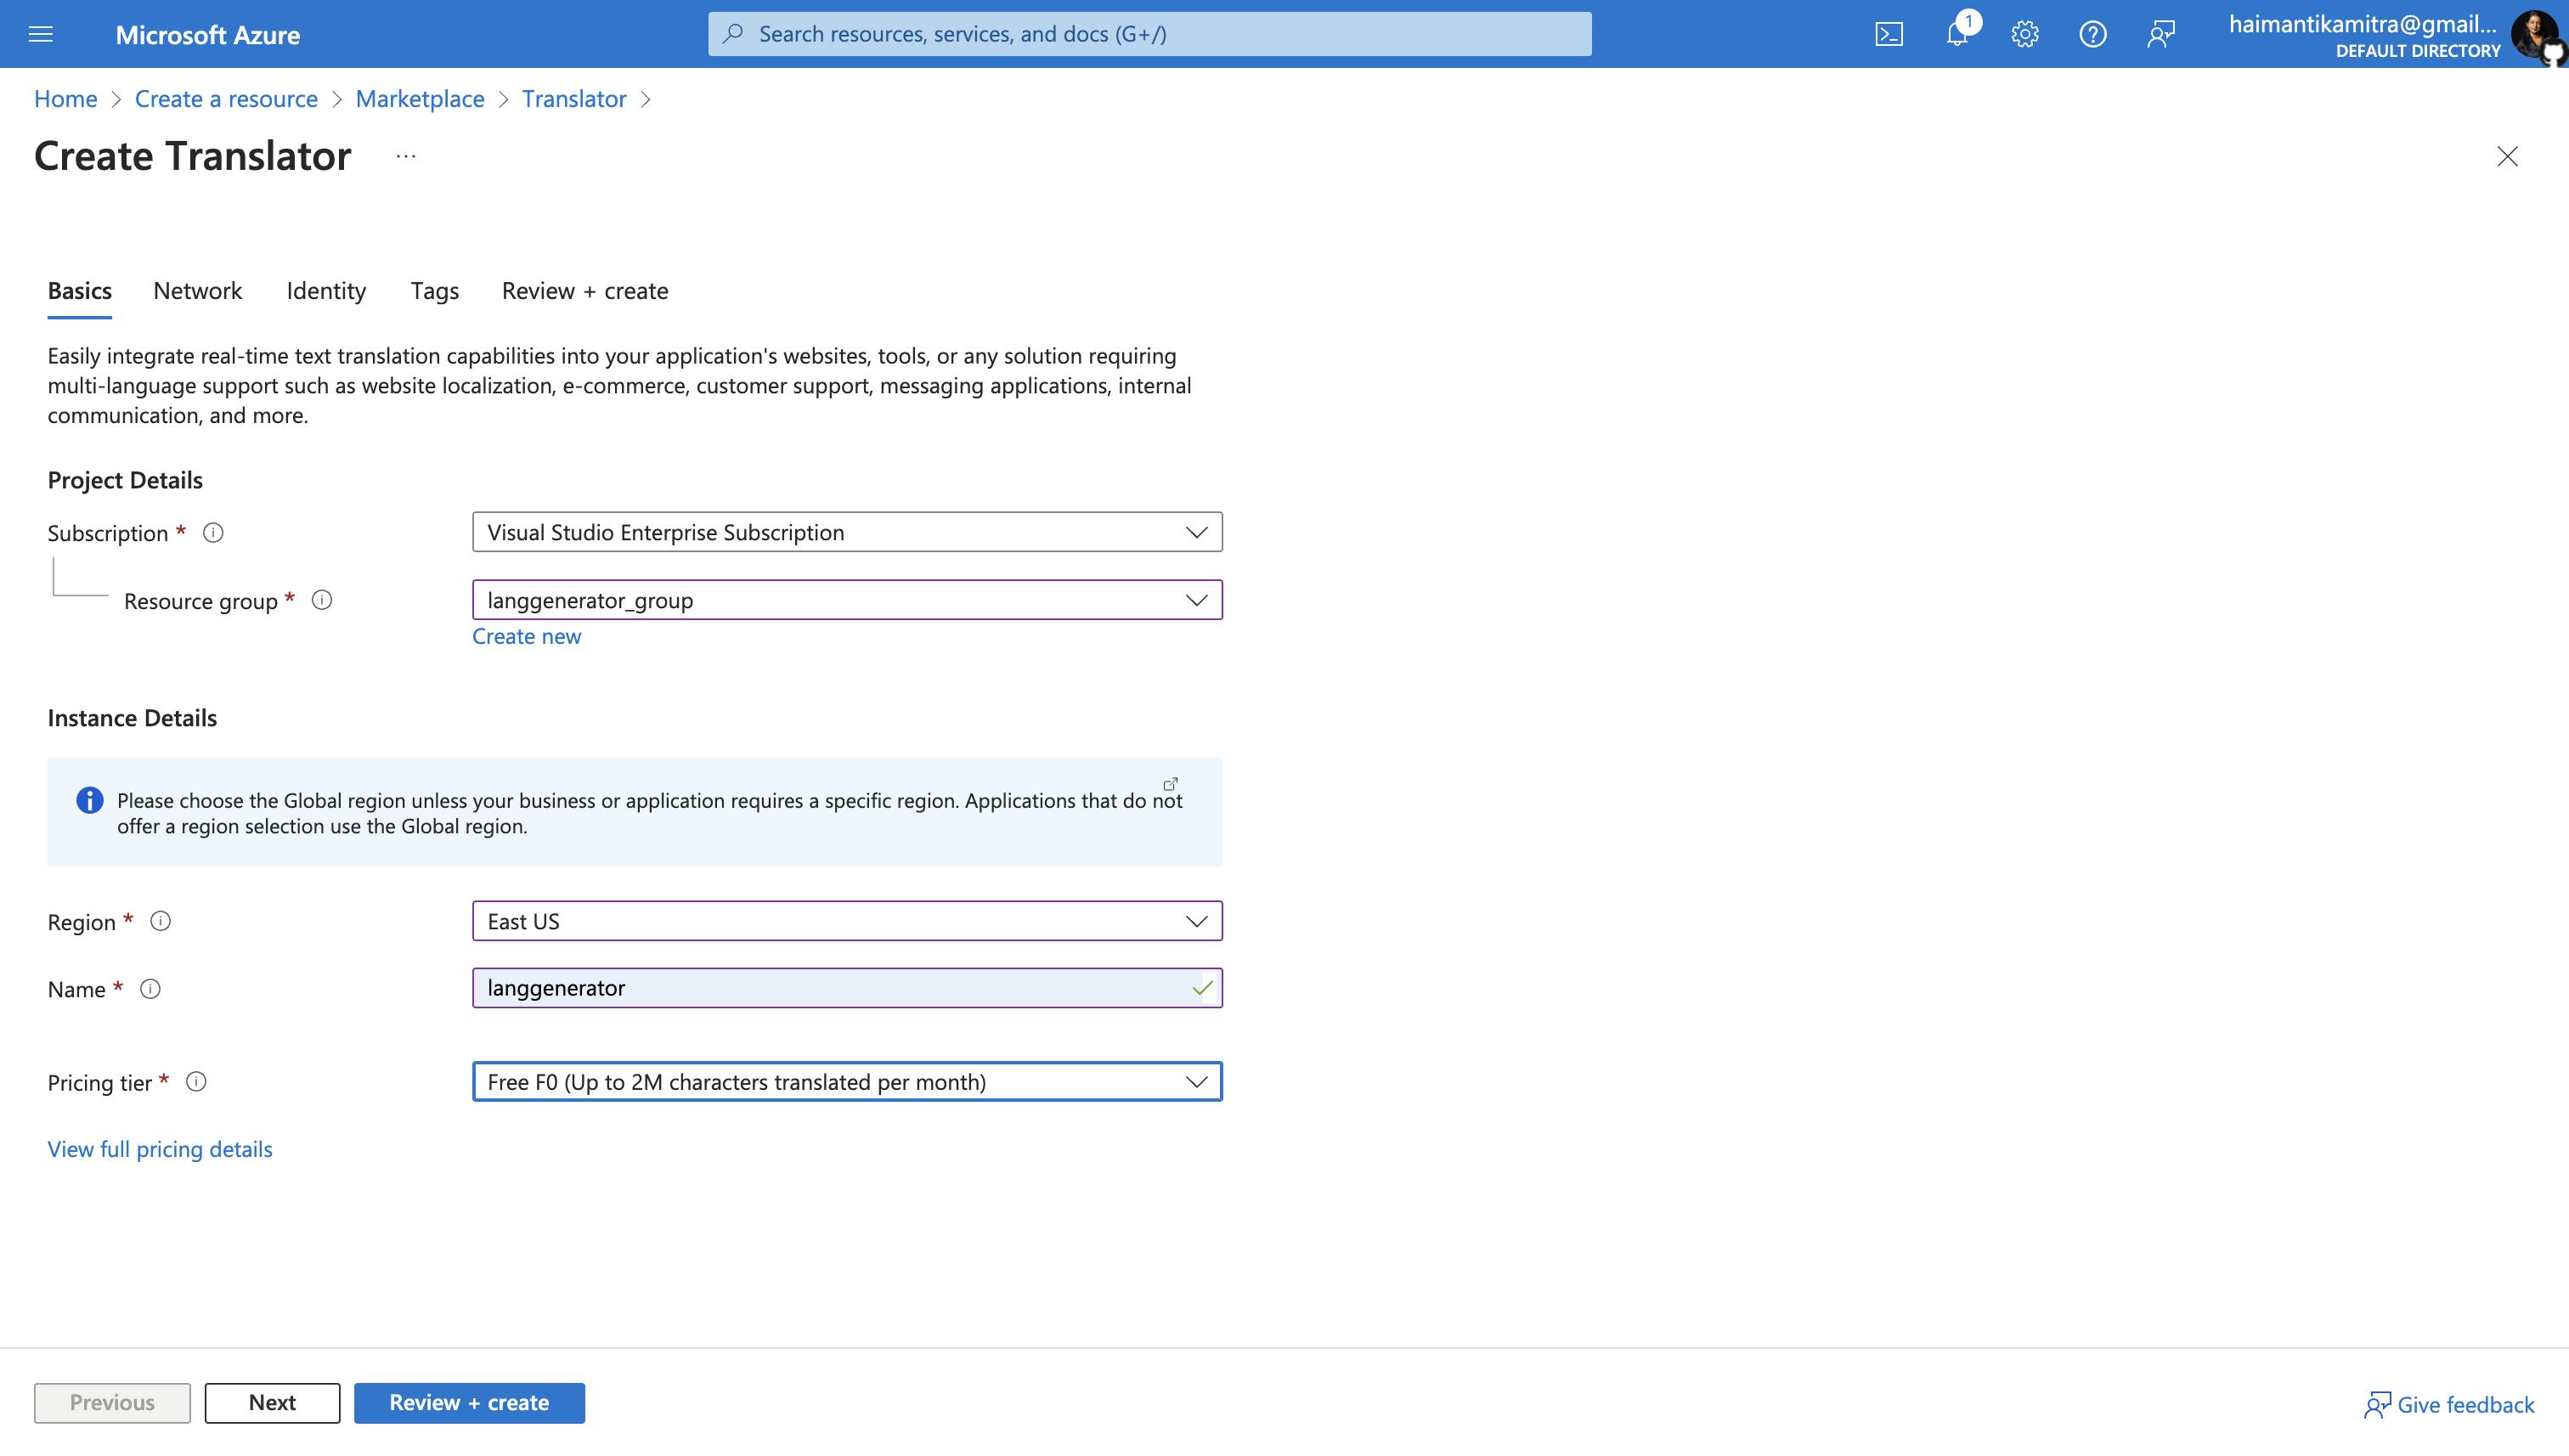 Screenshot of the Microsoft Azure portal showing the "Create Translator" setup page with fields for subscription, resource group, region, and instance details filled out.